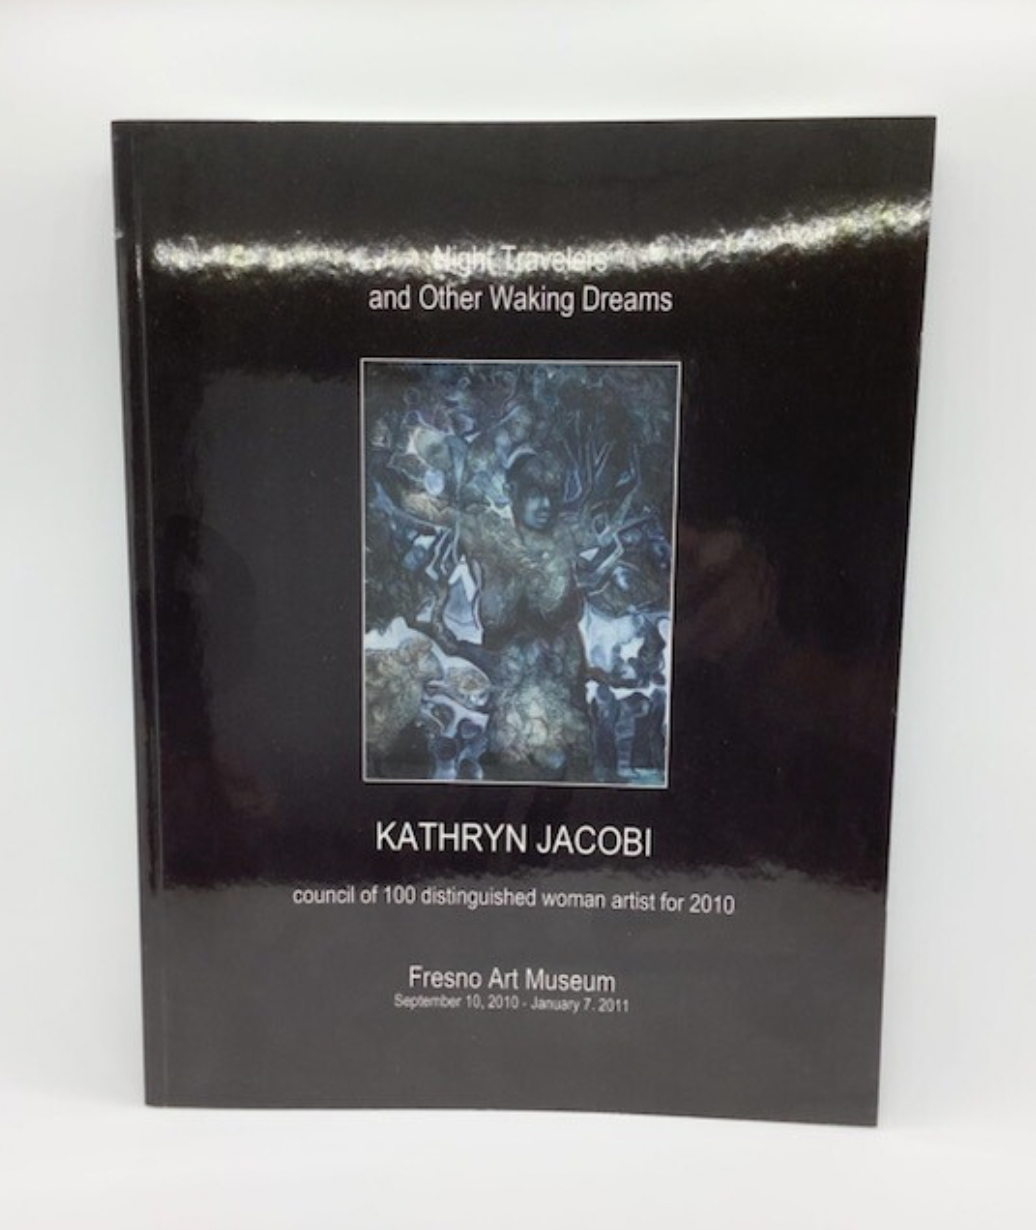 Kathryn Jacobi: Night Travelers and Other Waking Dreams 2010 Exhibition Catalog